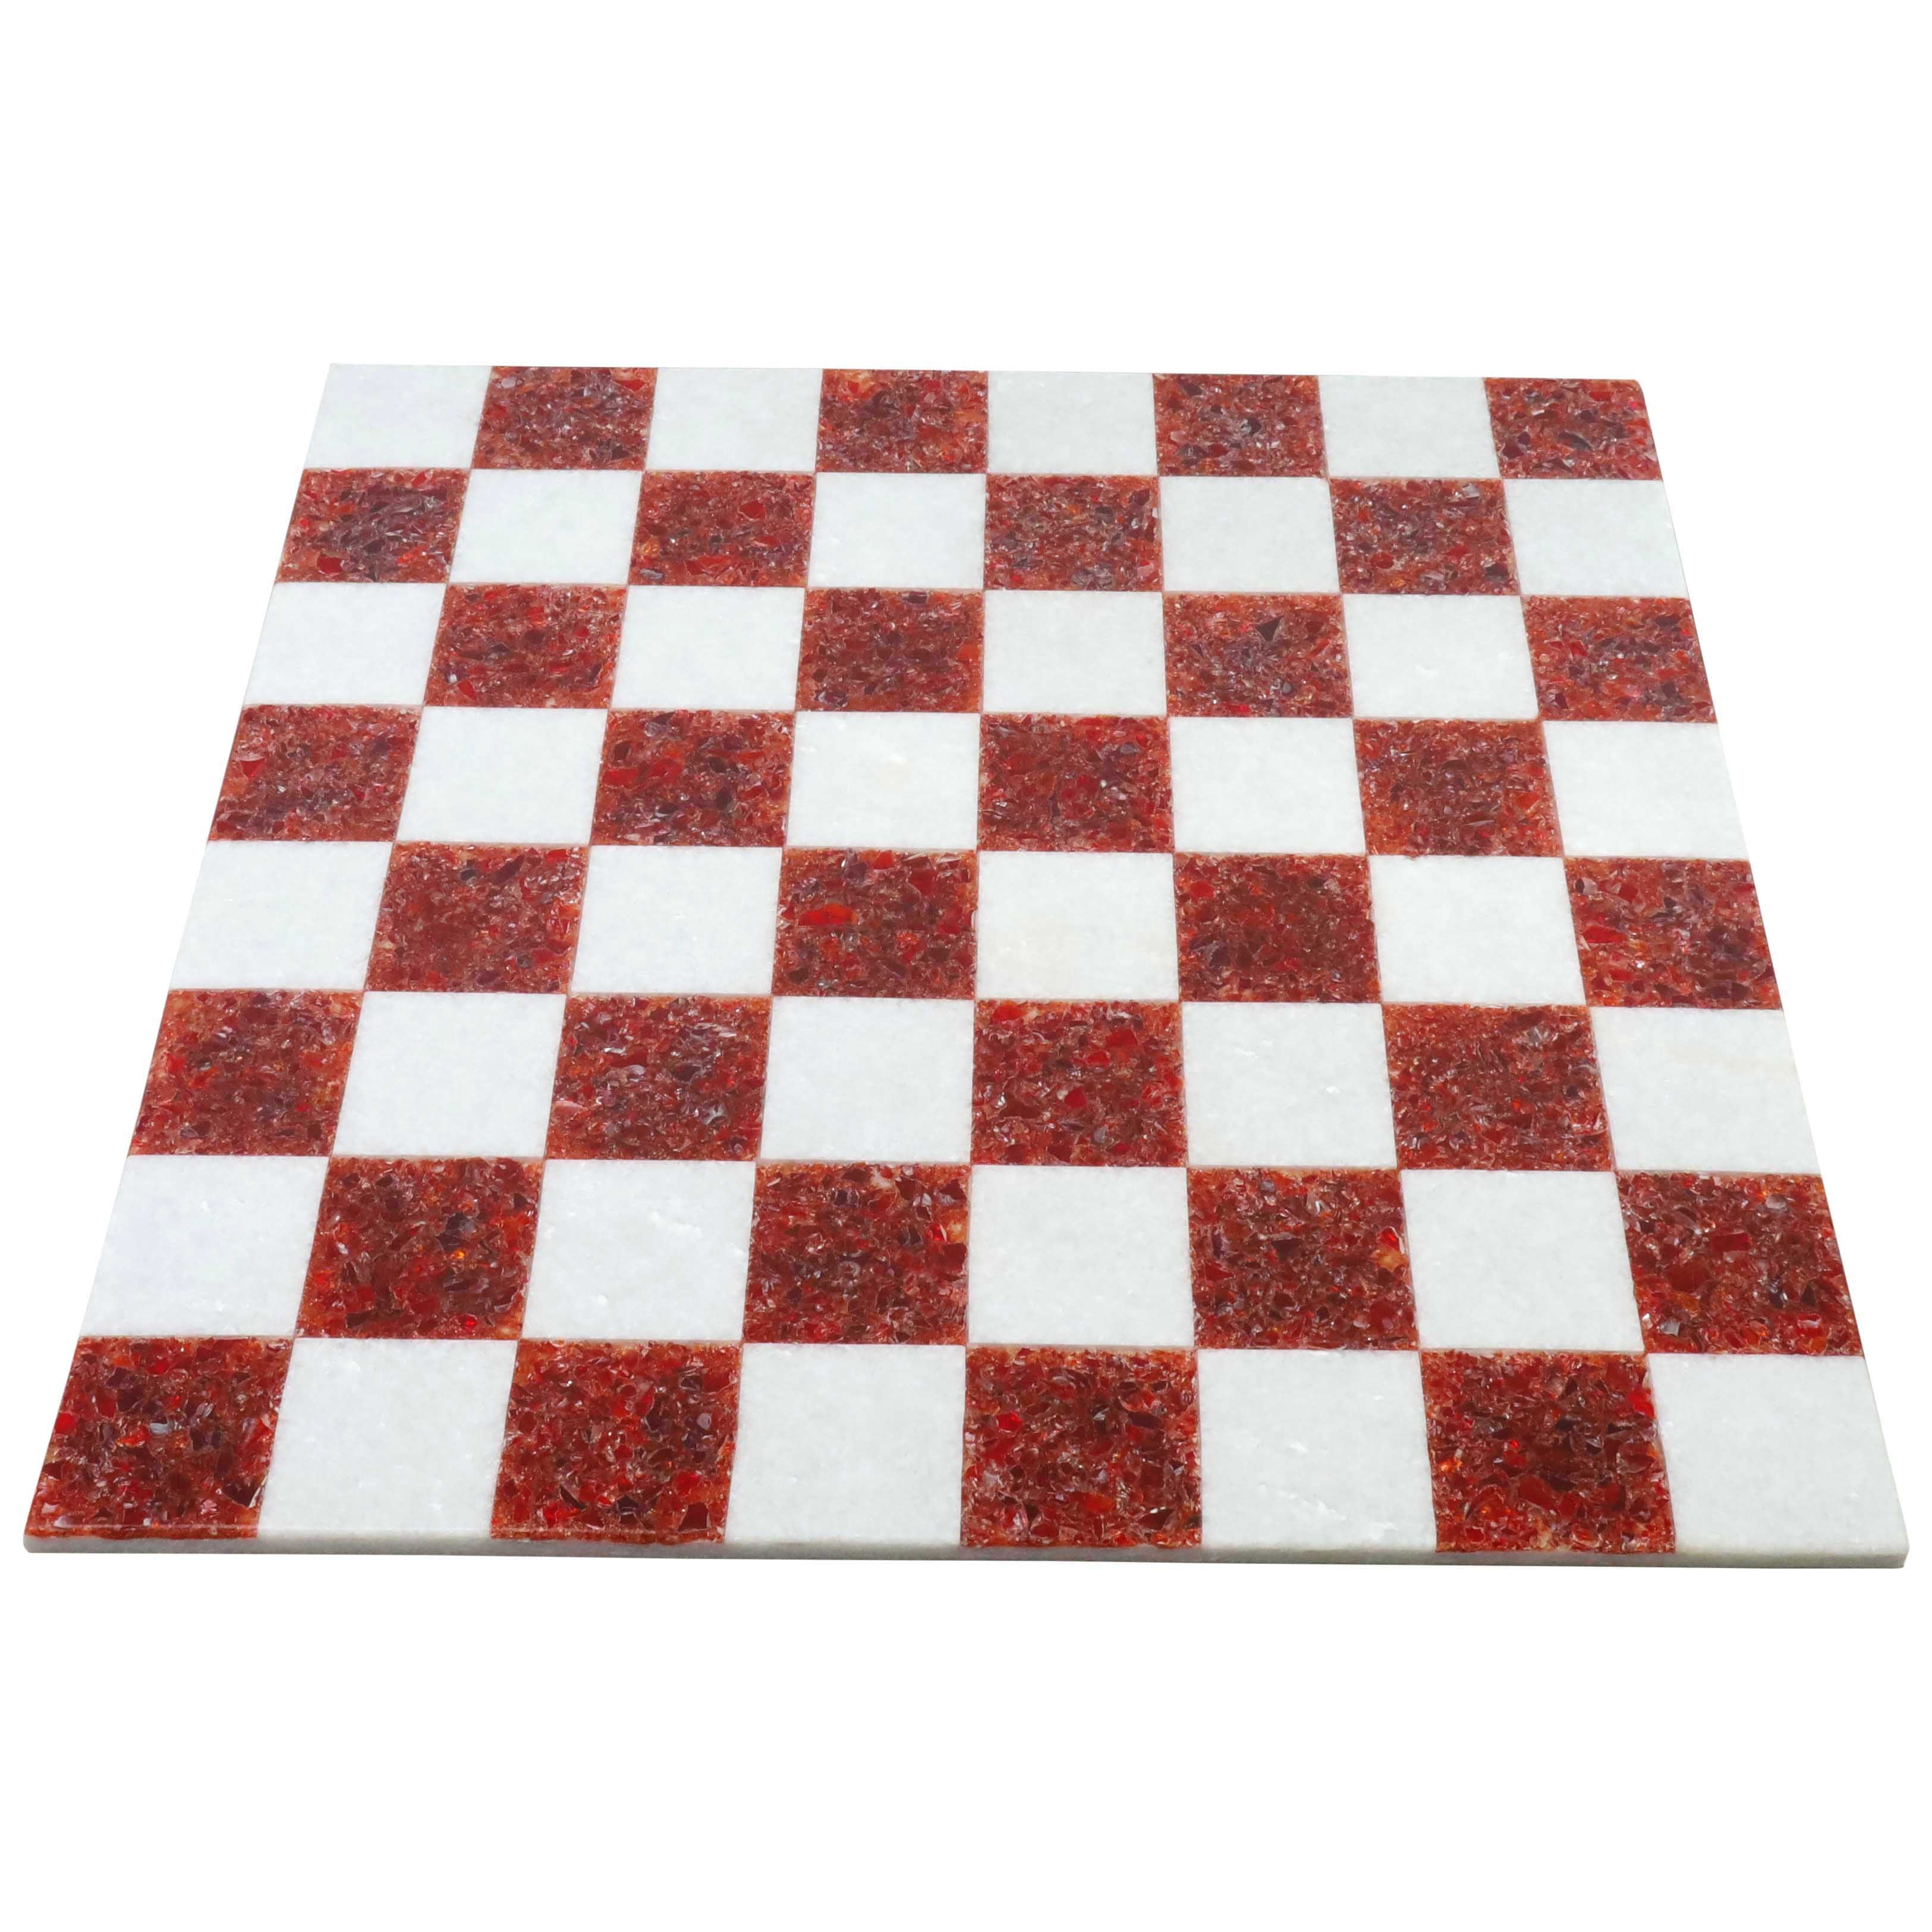 18'' Borderless Marble Stone Luxury Chess Board - Red And White Stone